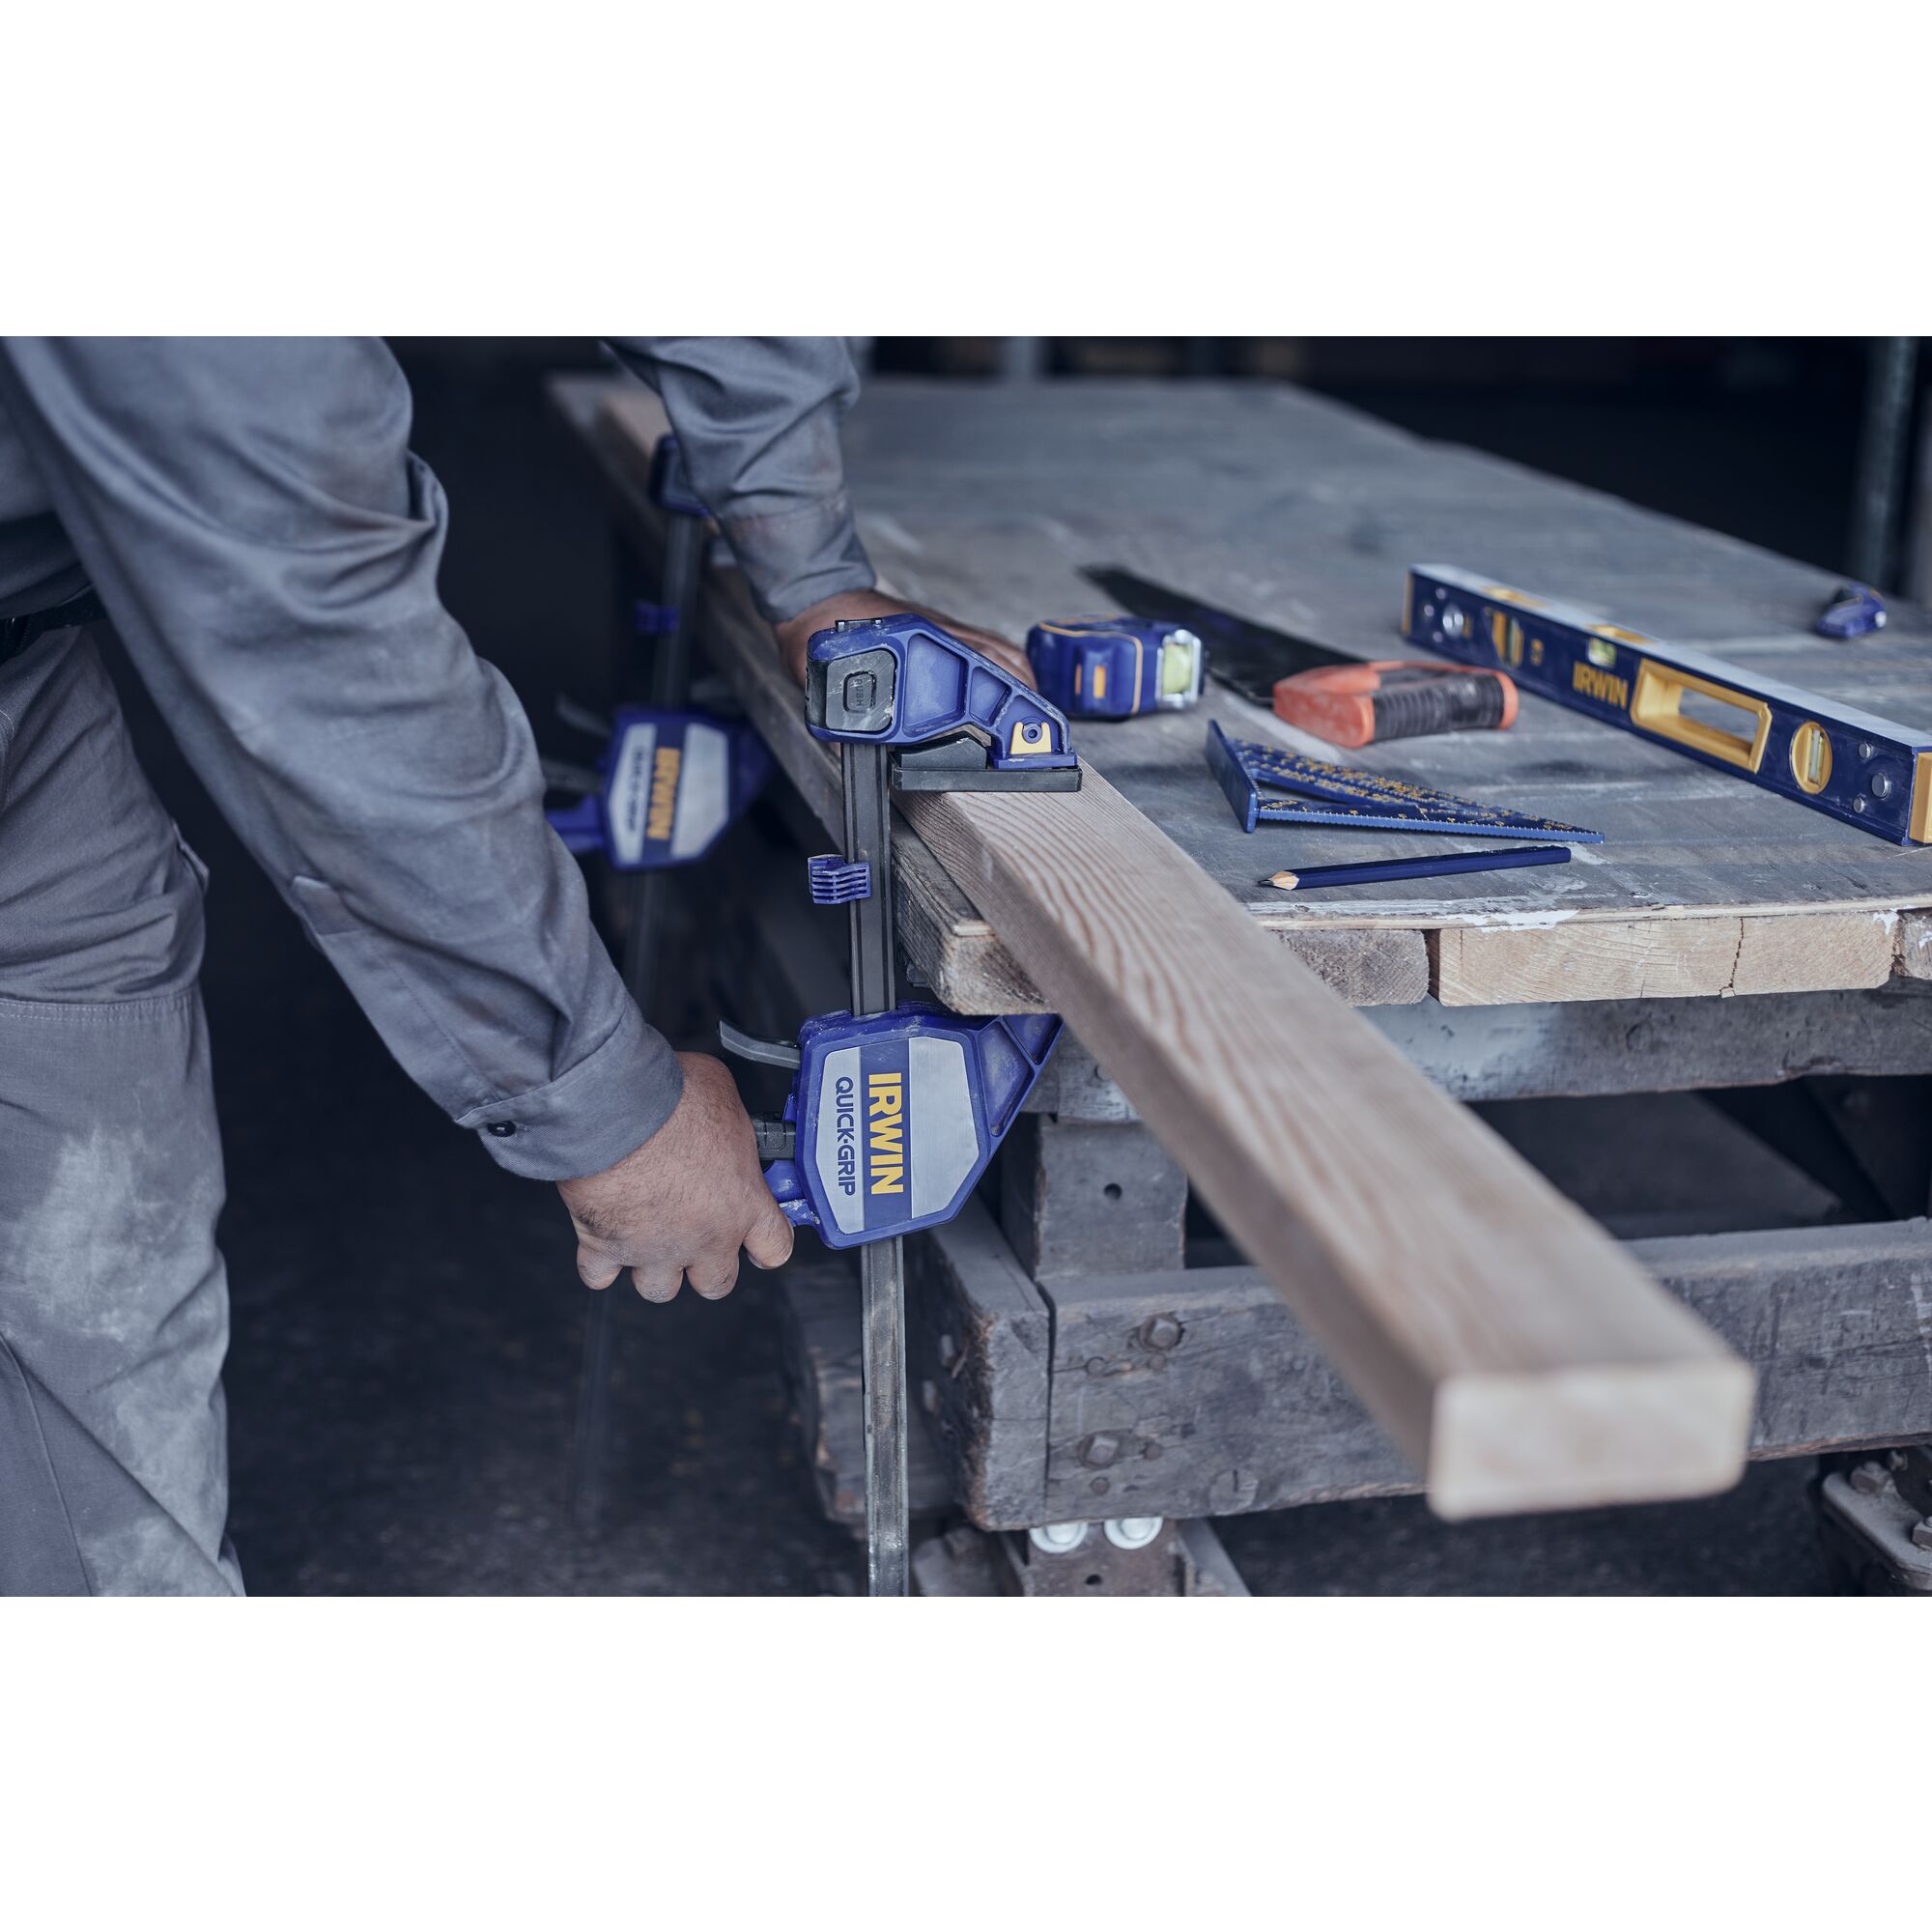 QUICK-GRIP® Heavy-Duty One-Handed Bar Clamps | IRWIN